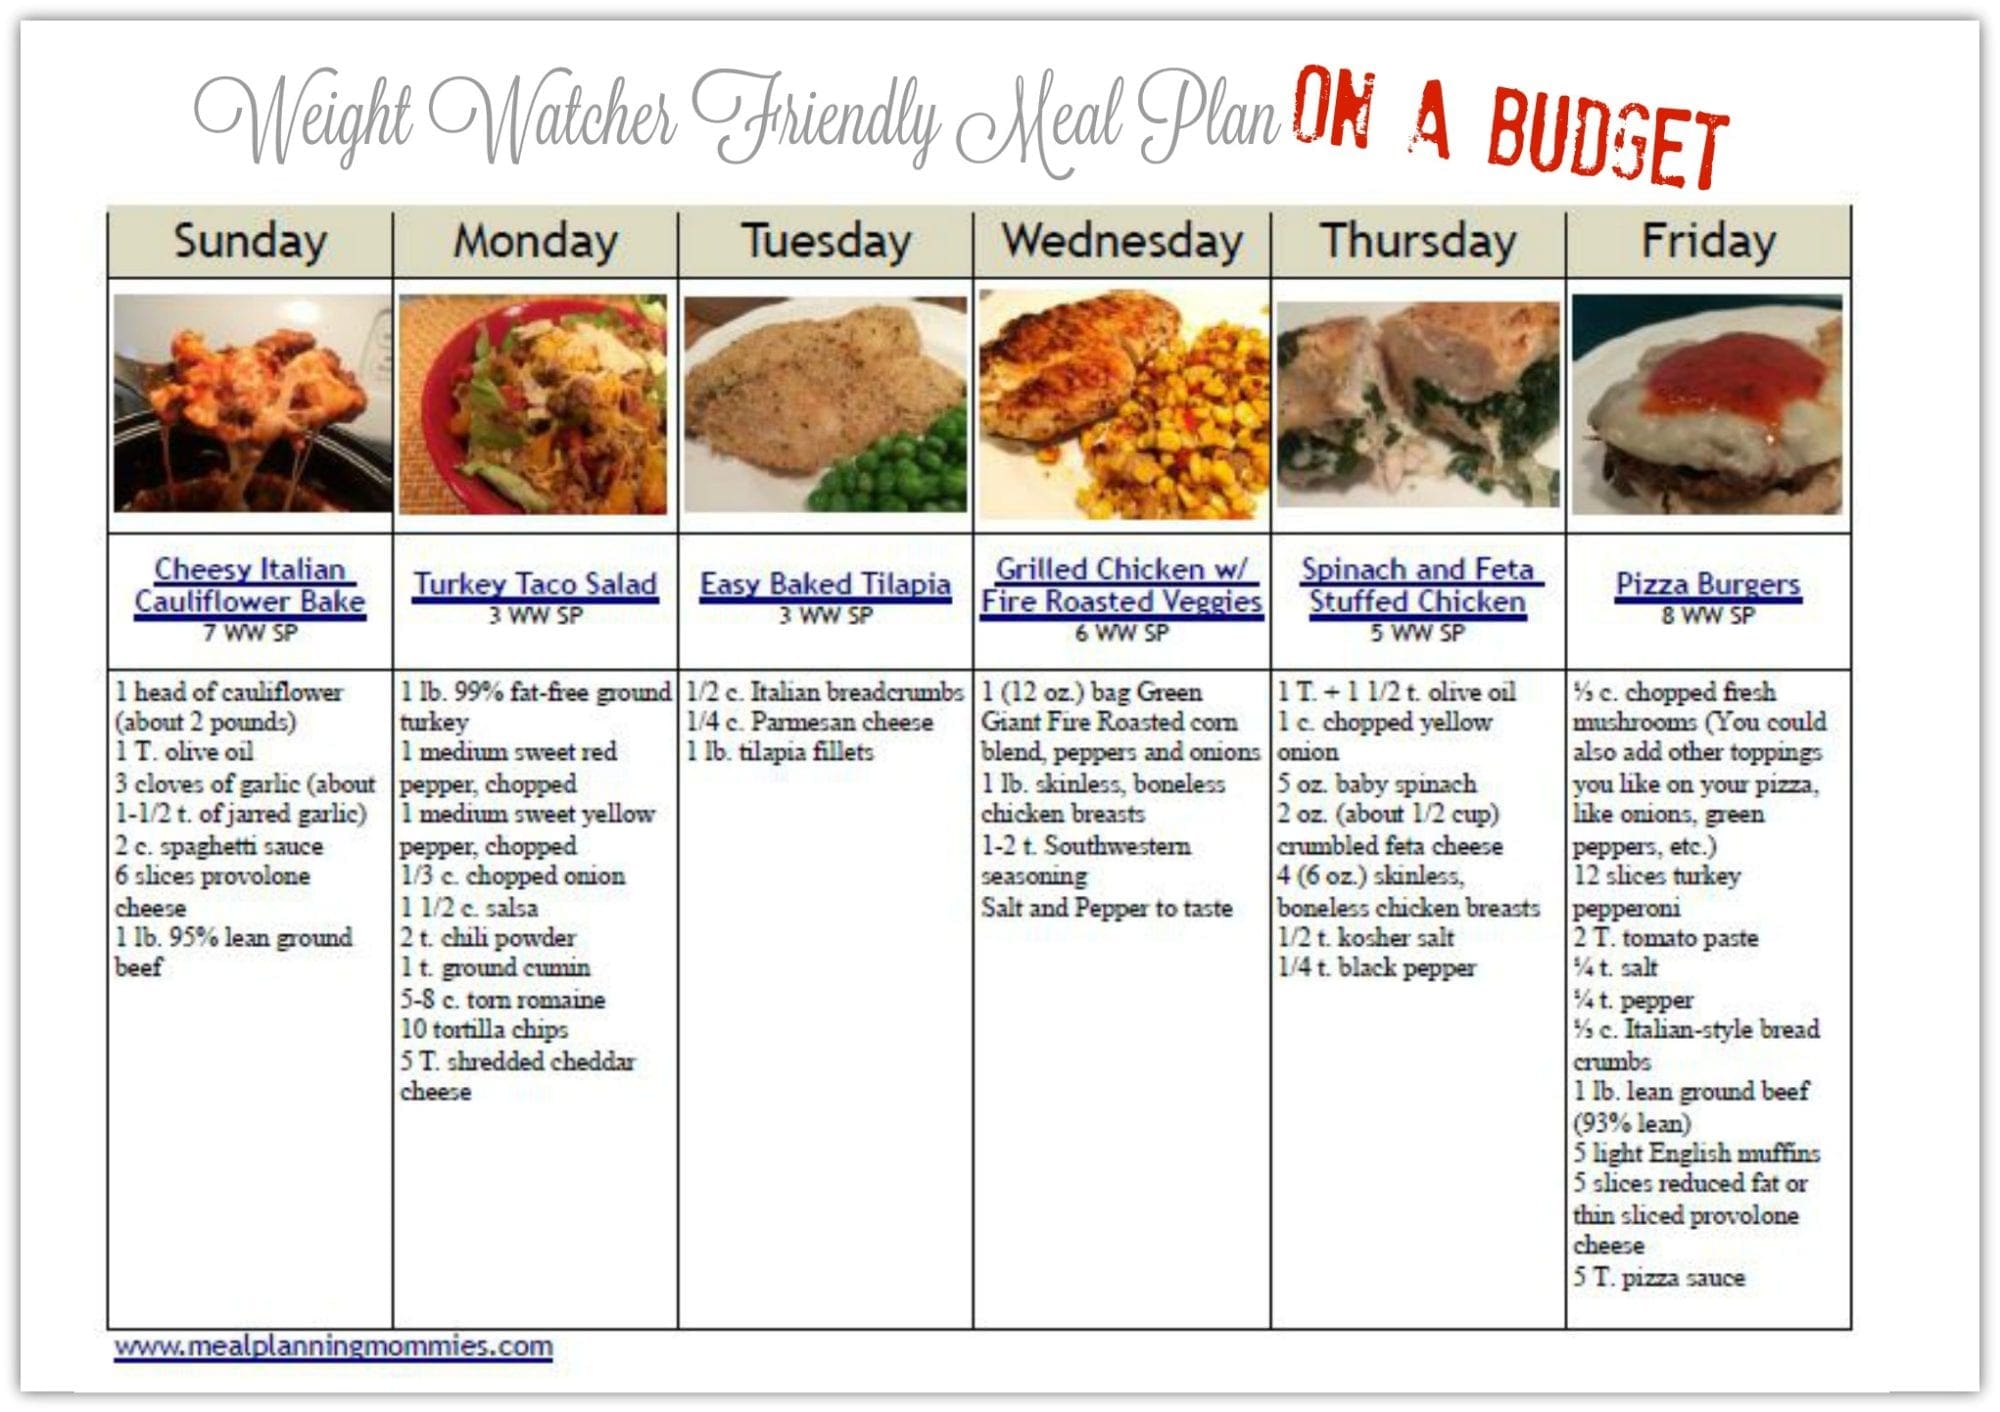 Frugal Weight Watcher Meal Plan with Smart Points snip